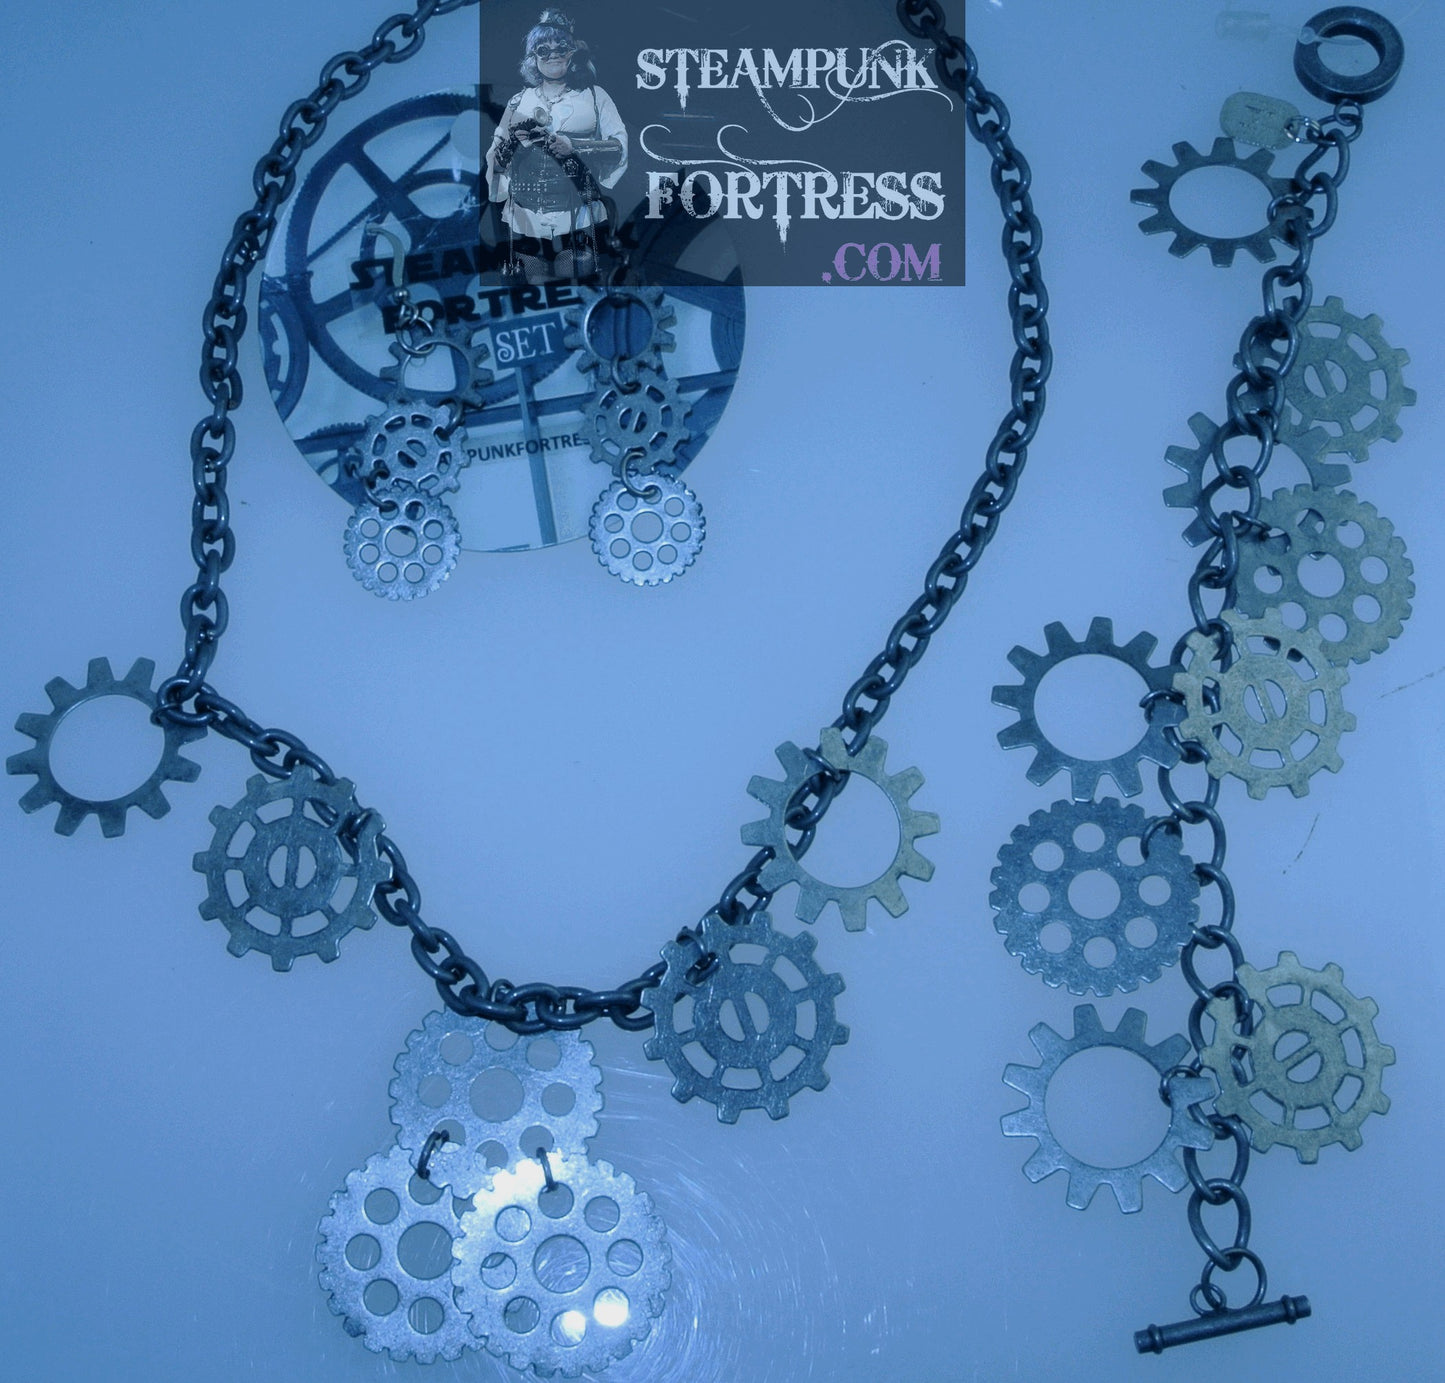 GUNMETAL SILVER GEARS 7 WATCH CLOCK NECKLACE SET AVAILABLE STARR WILDE STEAMPUNK FORTRESS